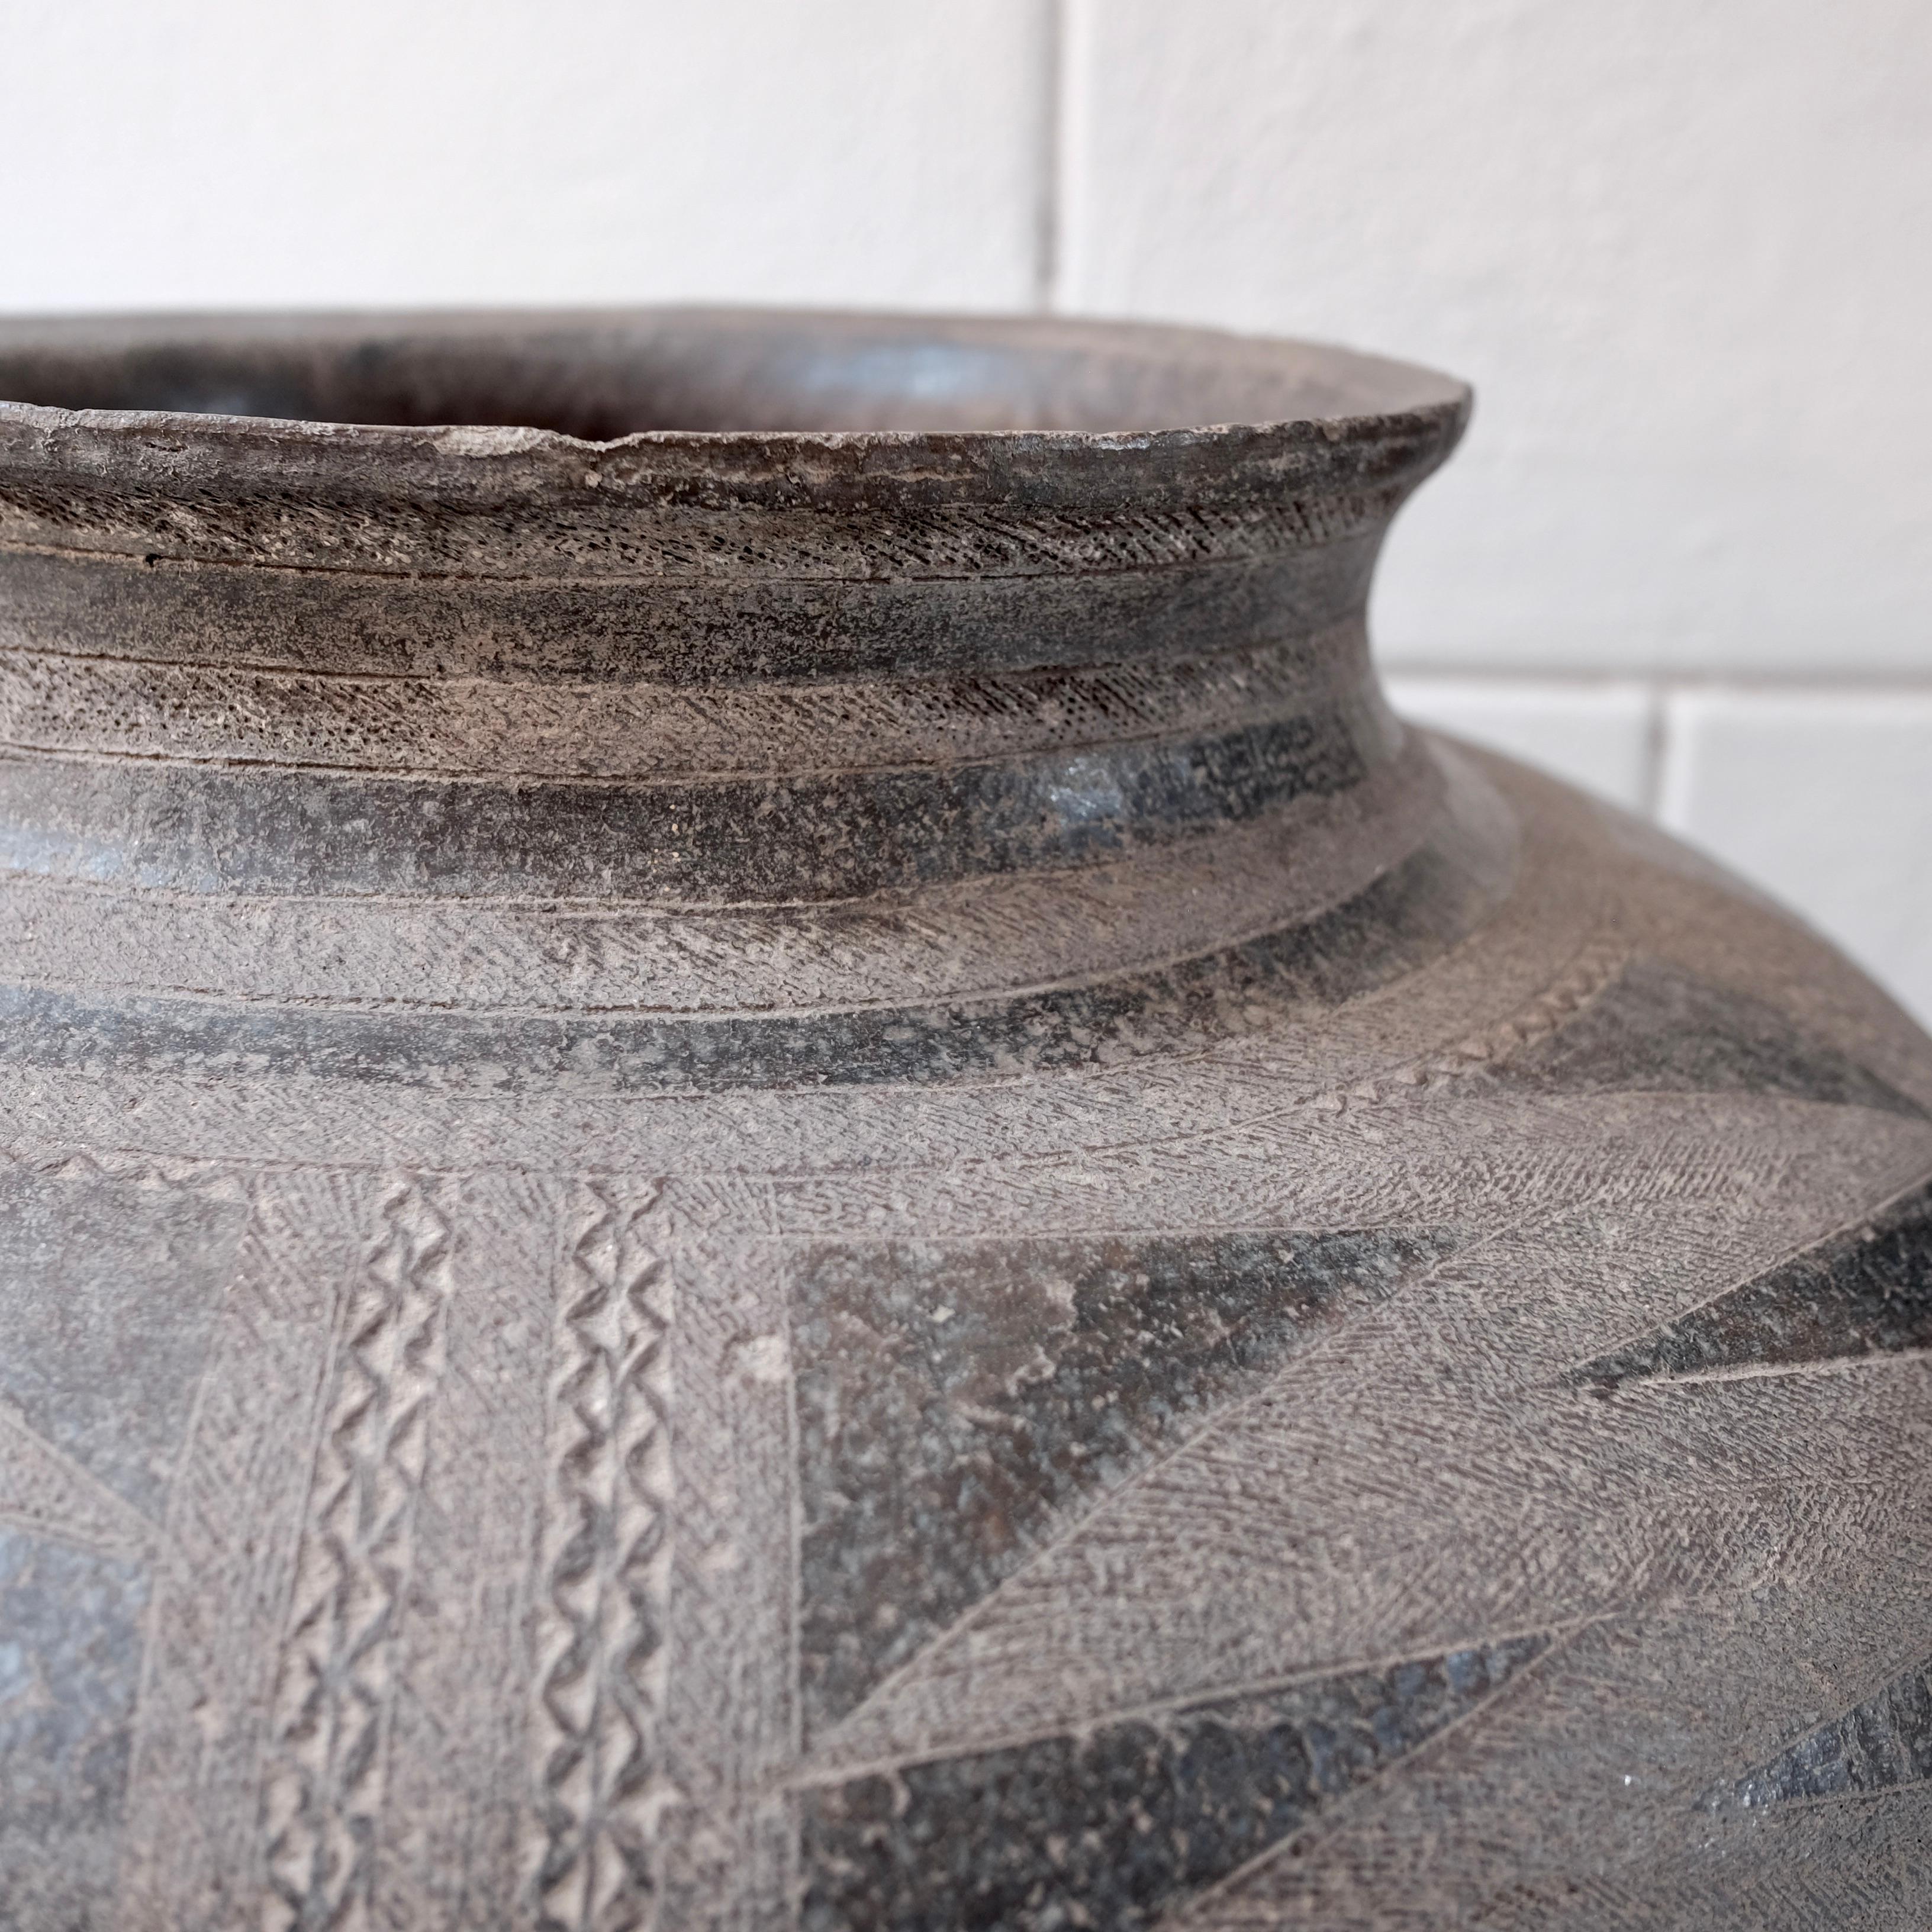 Maconde Water Pot from Mozambique, Africa 1